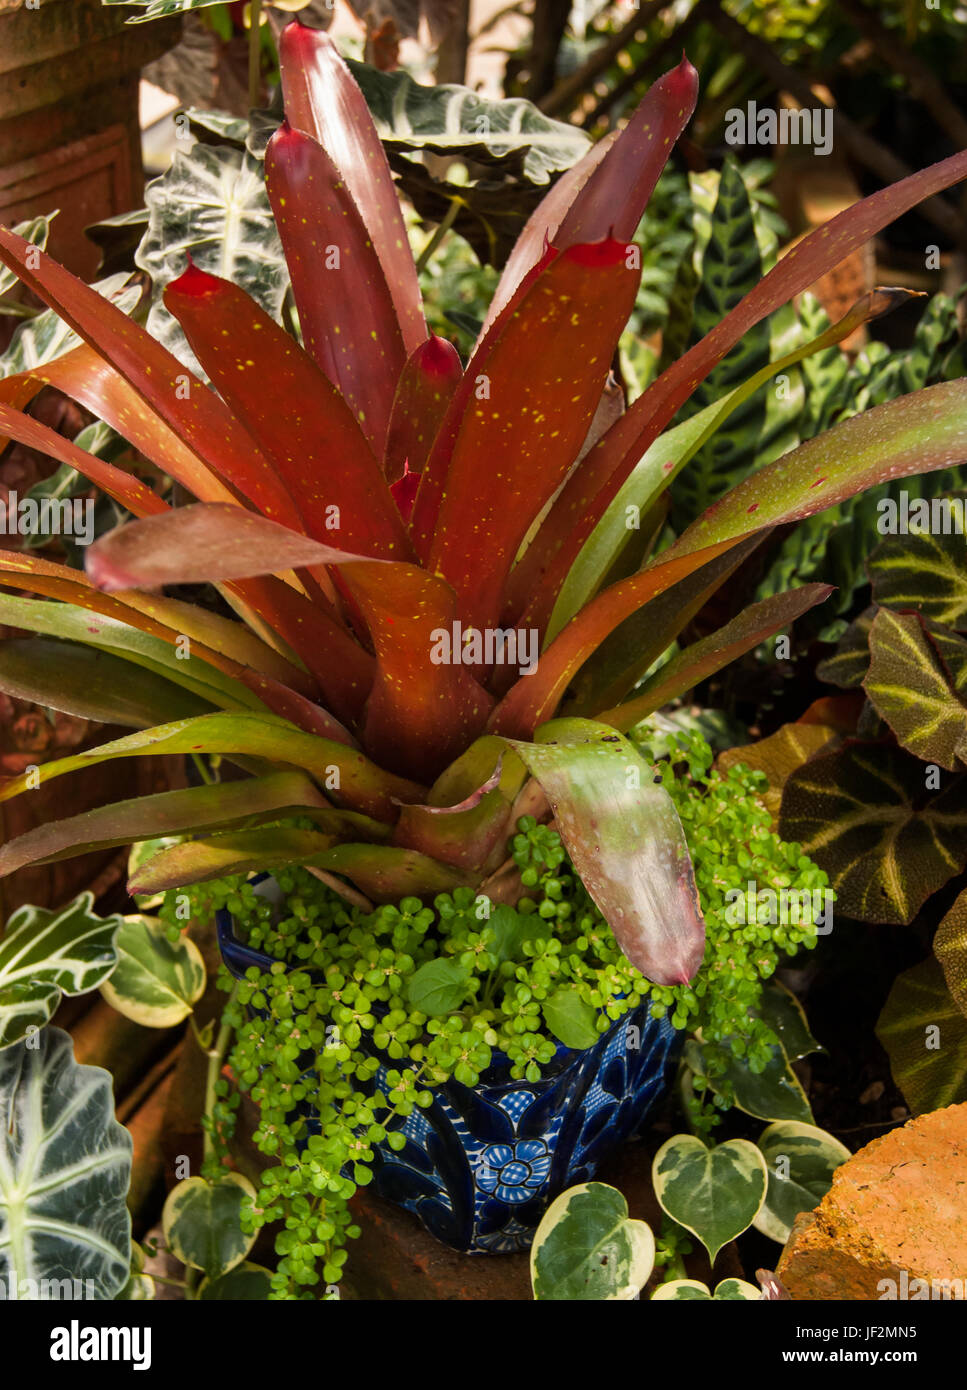 A bromeliad plant with some other greenery in a beautiful blue pot Stock Photo